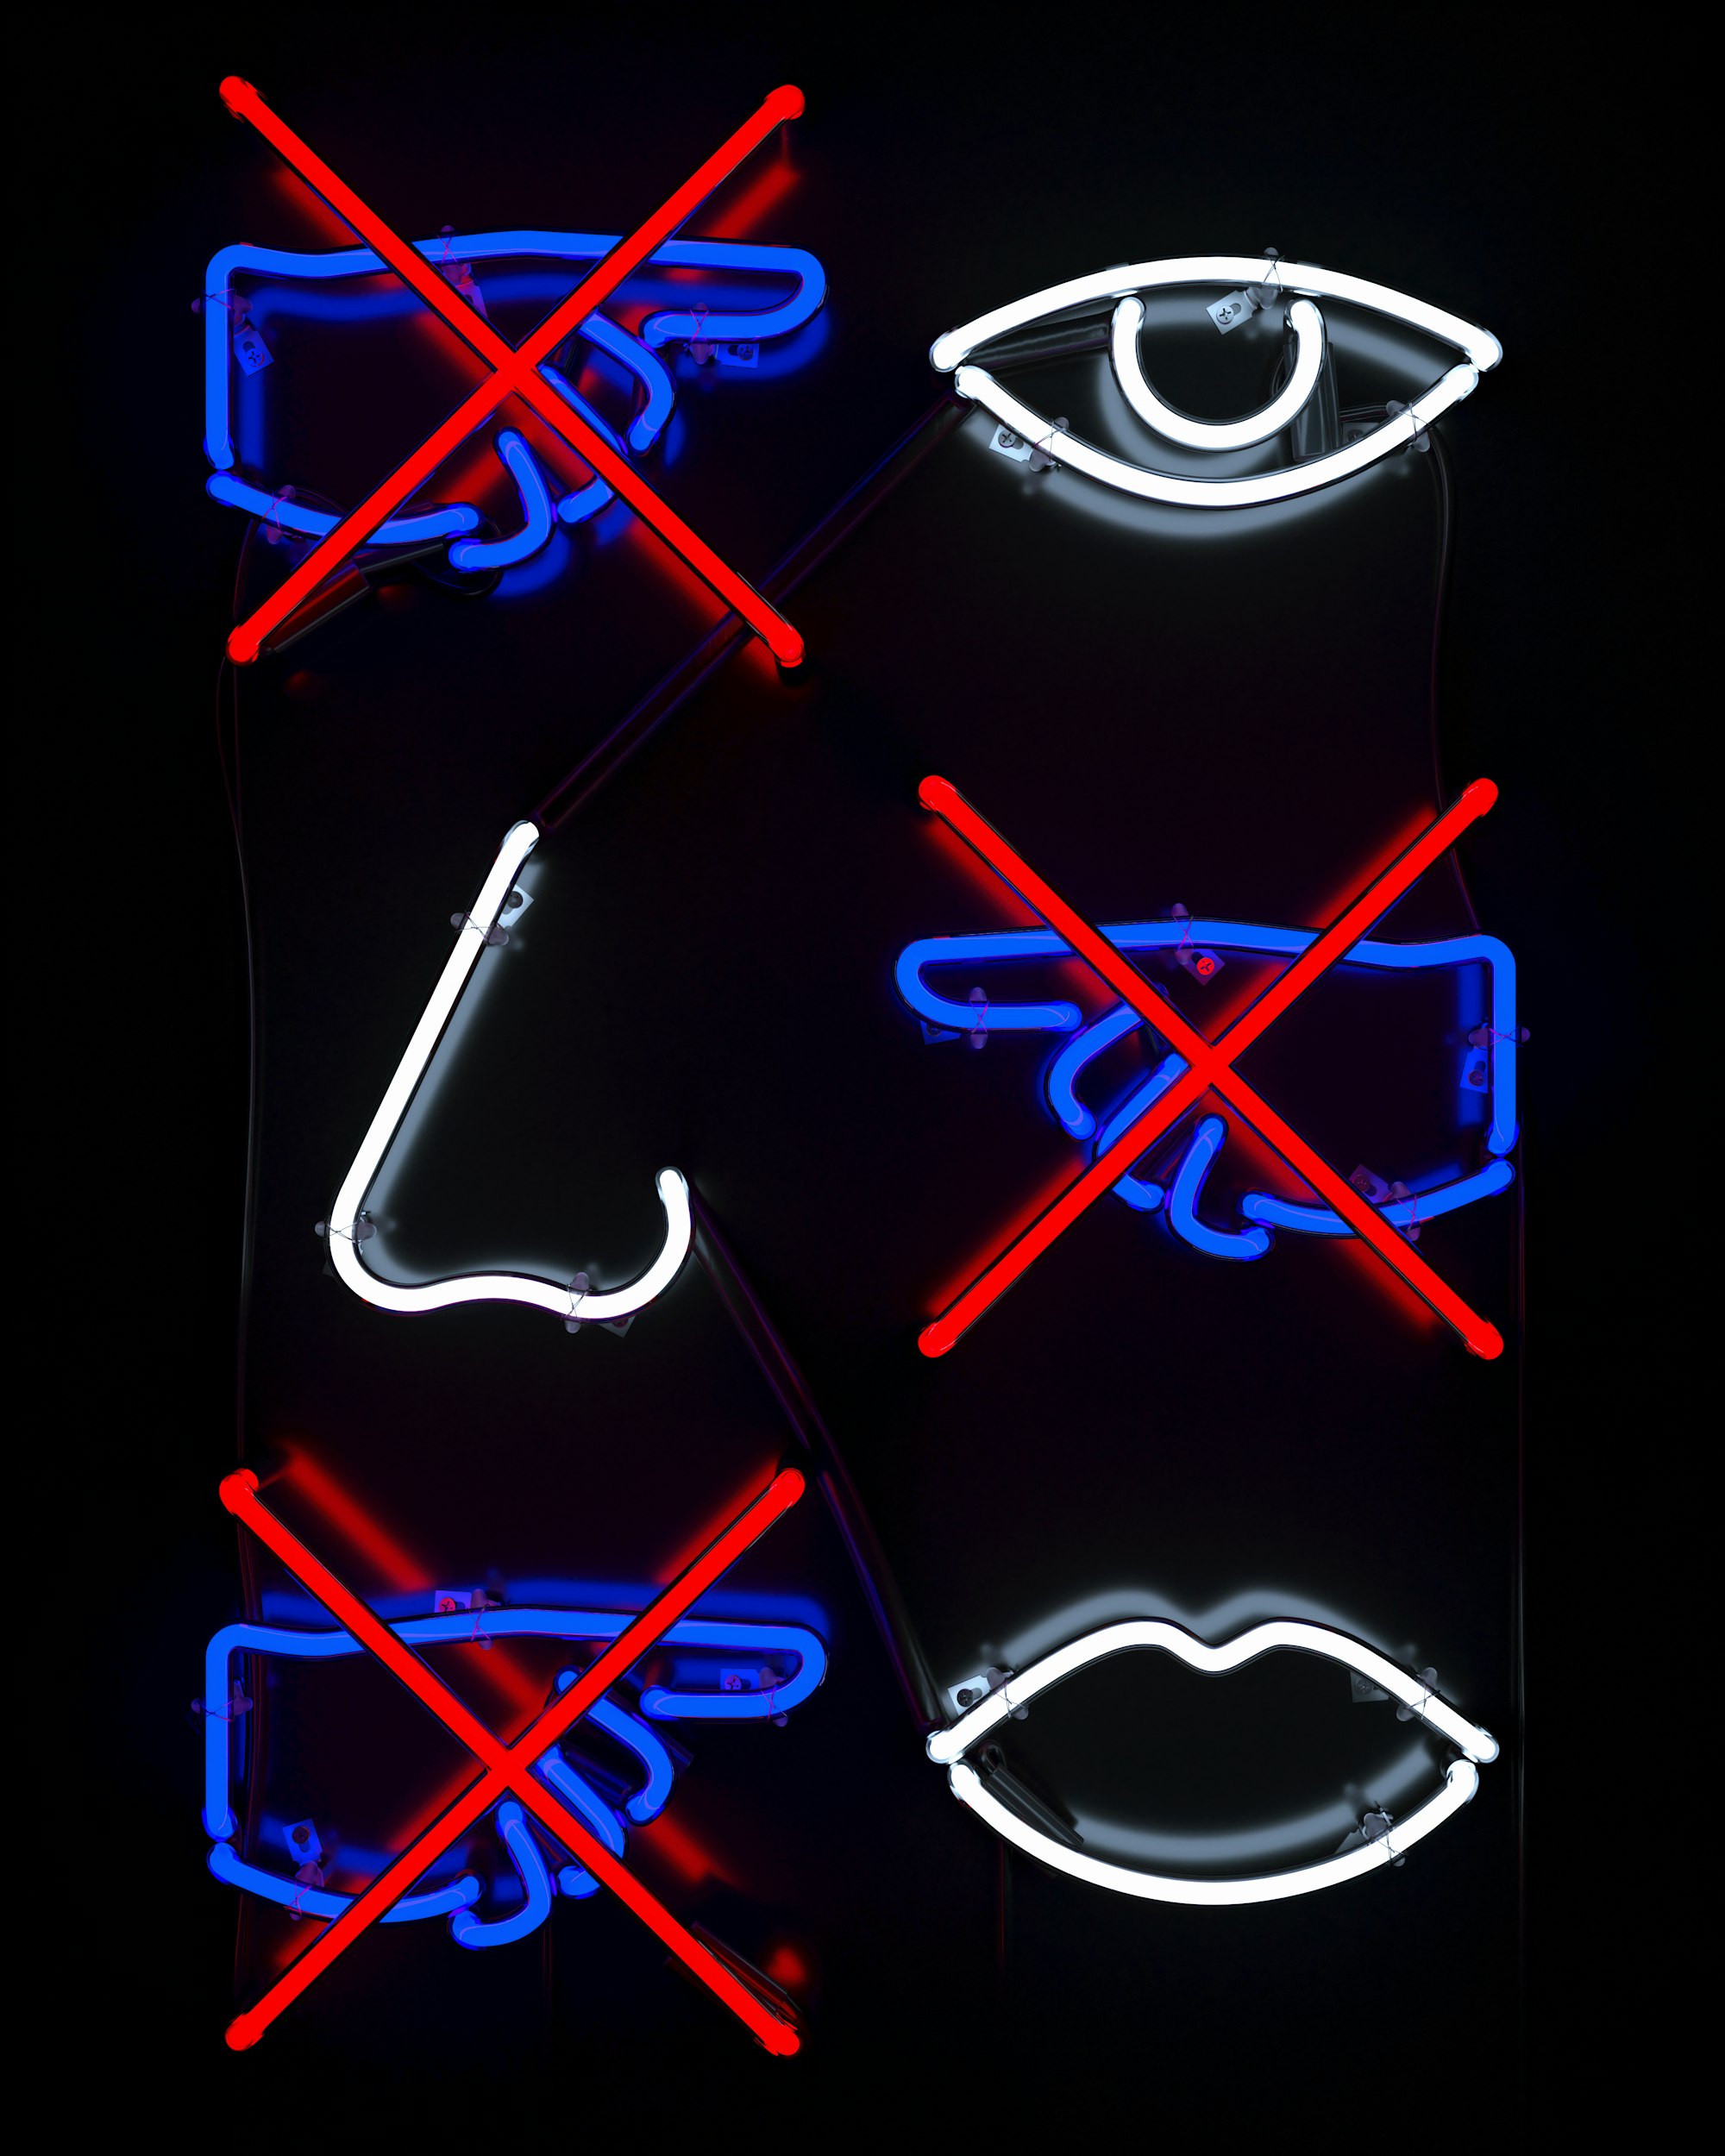 Avoid touching your eyes, nose and mouth.
Rizon Parein and Mark Sloan (Mother NY) collaborated on a series of neon posters to help stop the spread of COVID-19. Image created by Rizon Parein. Submitted for United Nations Global Call Out To Creatives - help stop the spread of COVID-19.